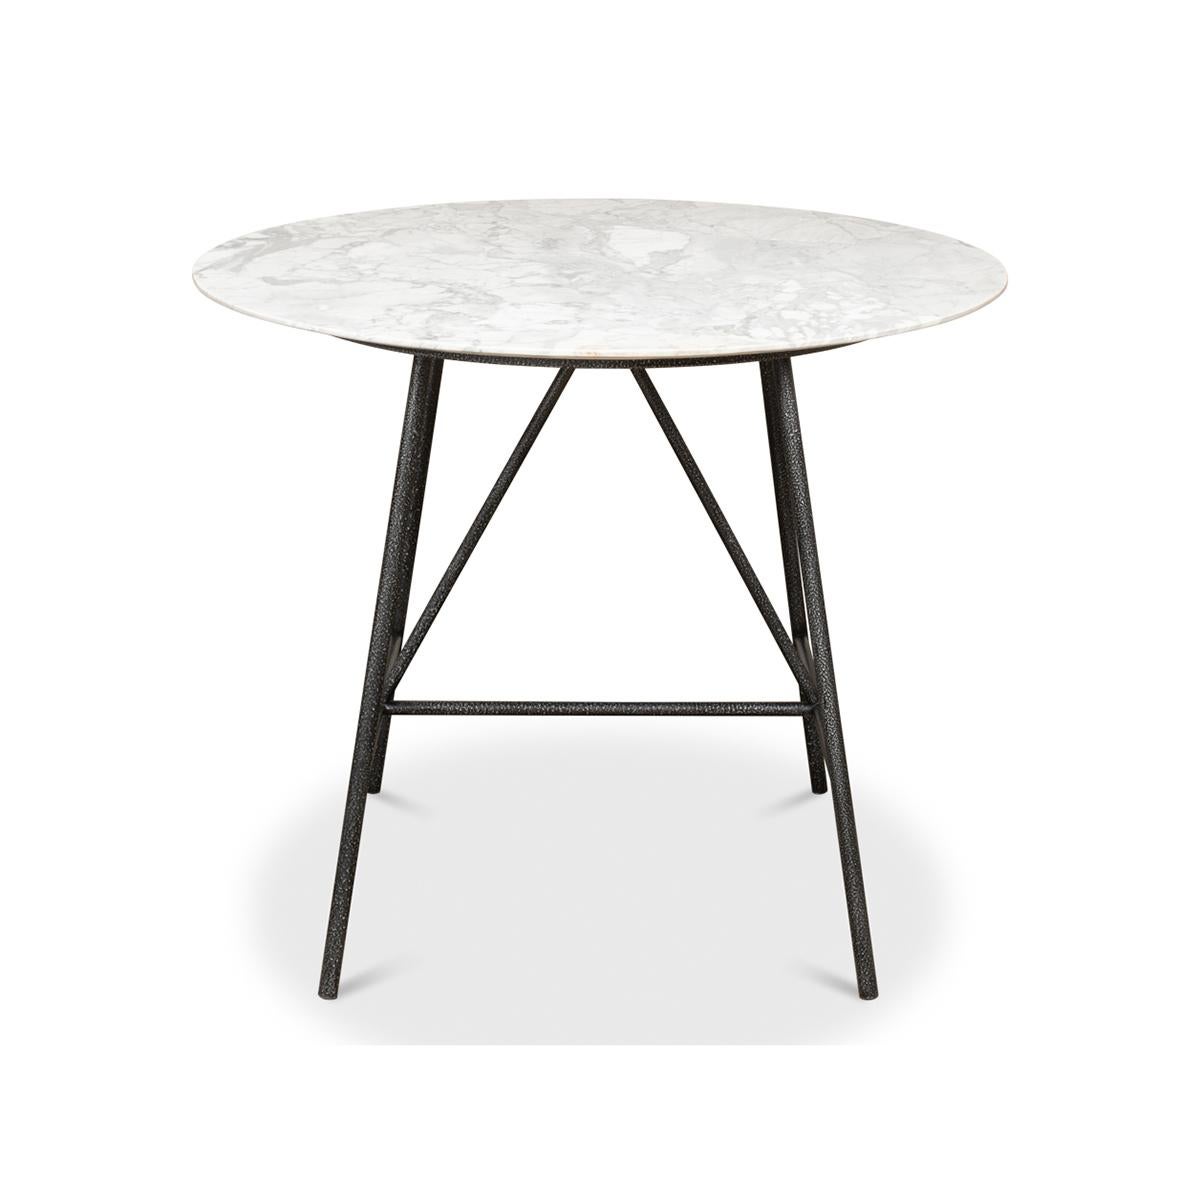 With a round Italian marble top on an iron base in a black finish. 

A clean and modern European style cafe style table.

Dimensions: 36